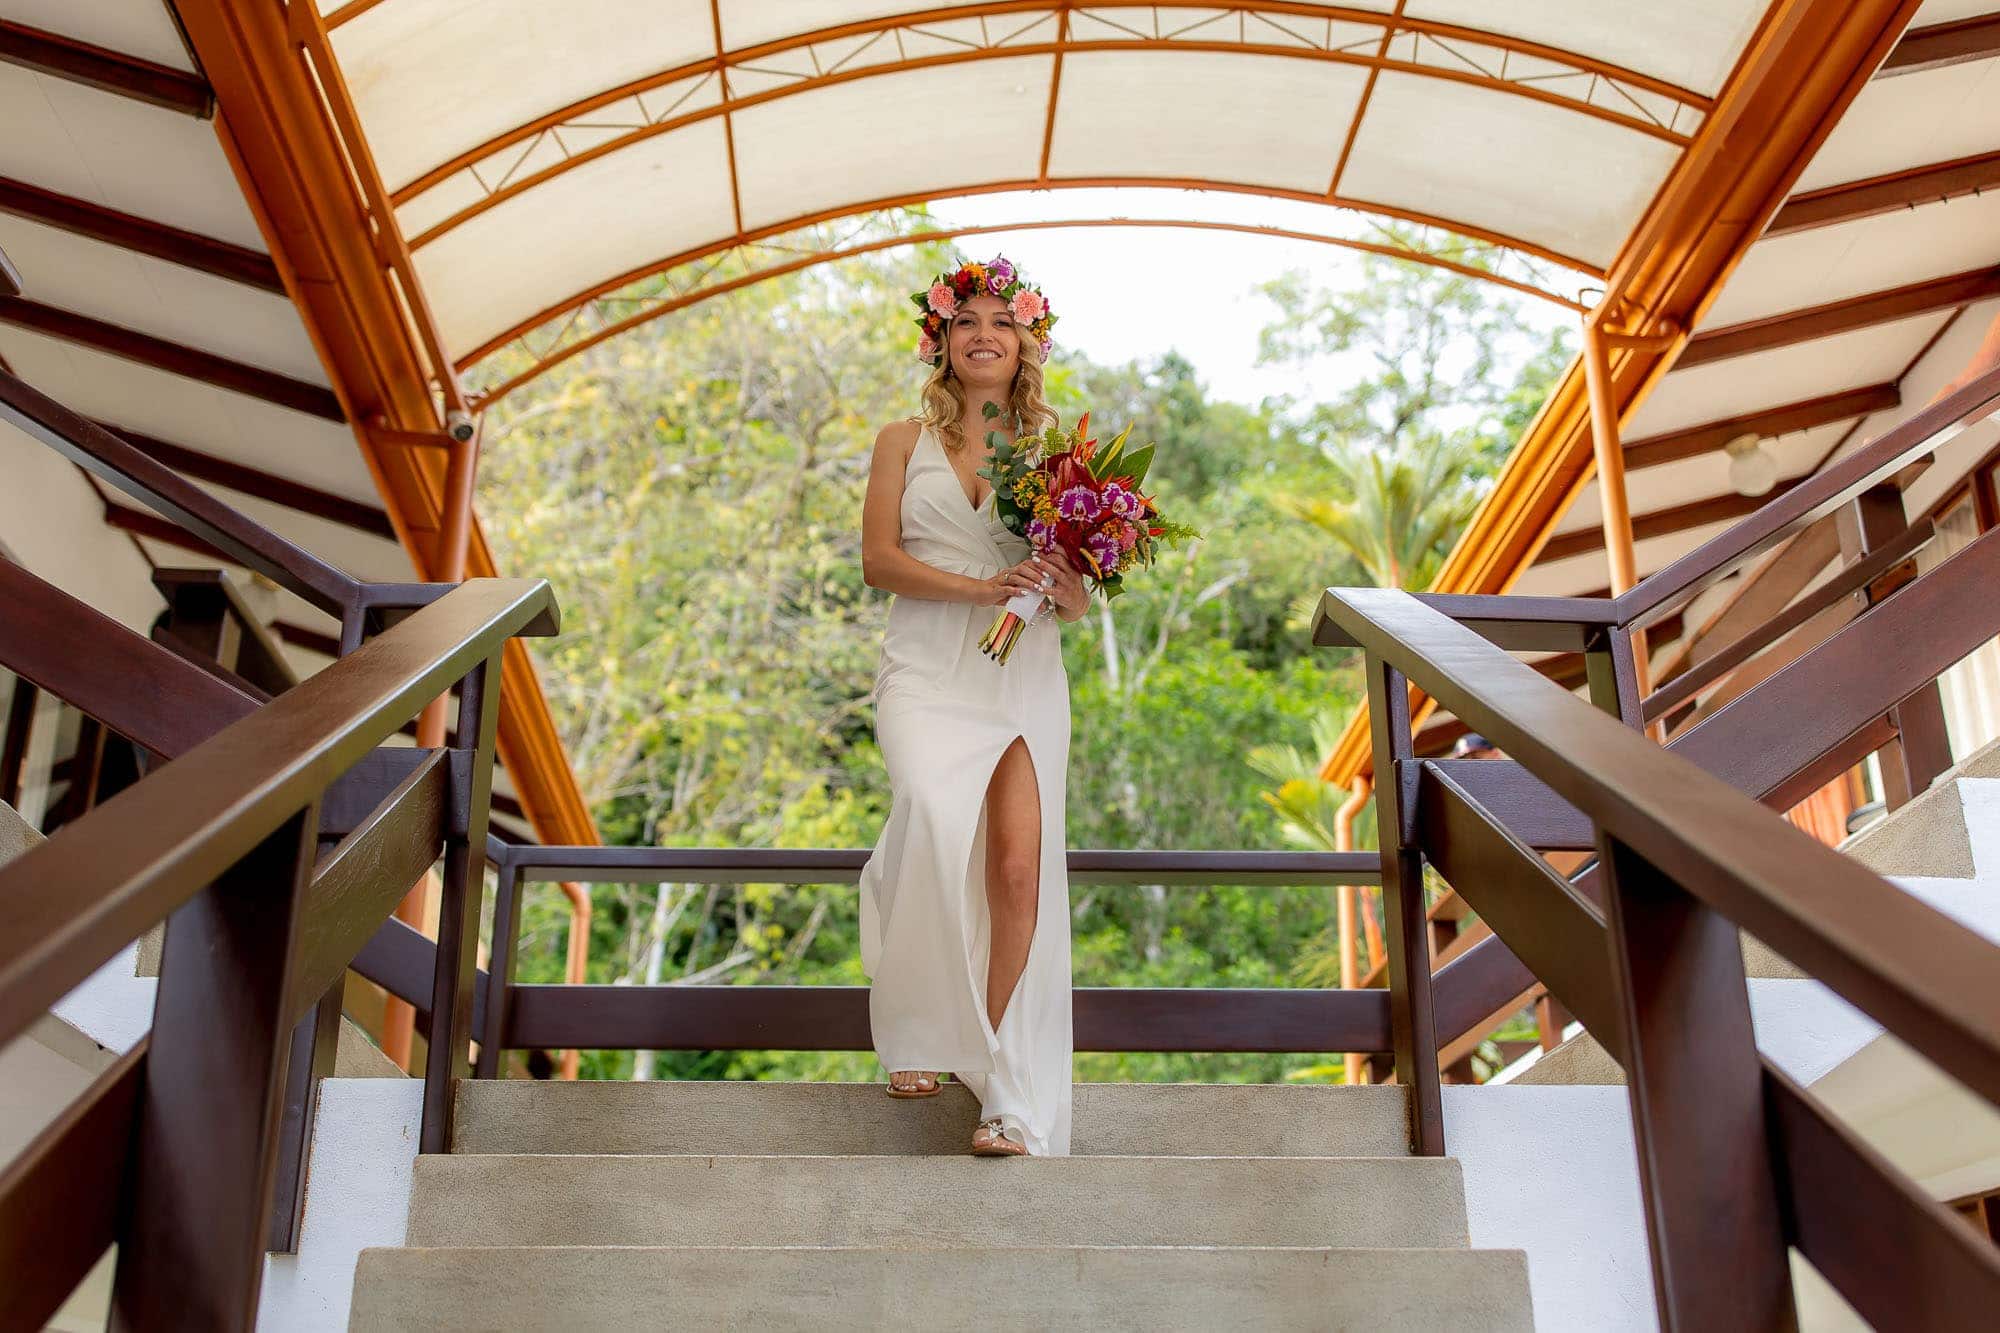 the bride heading out for her simple wedding in Costa Rica